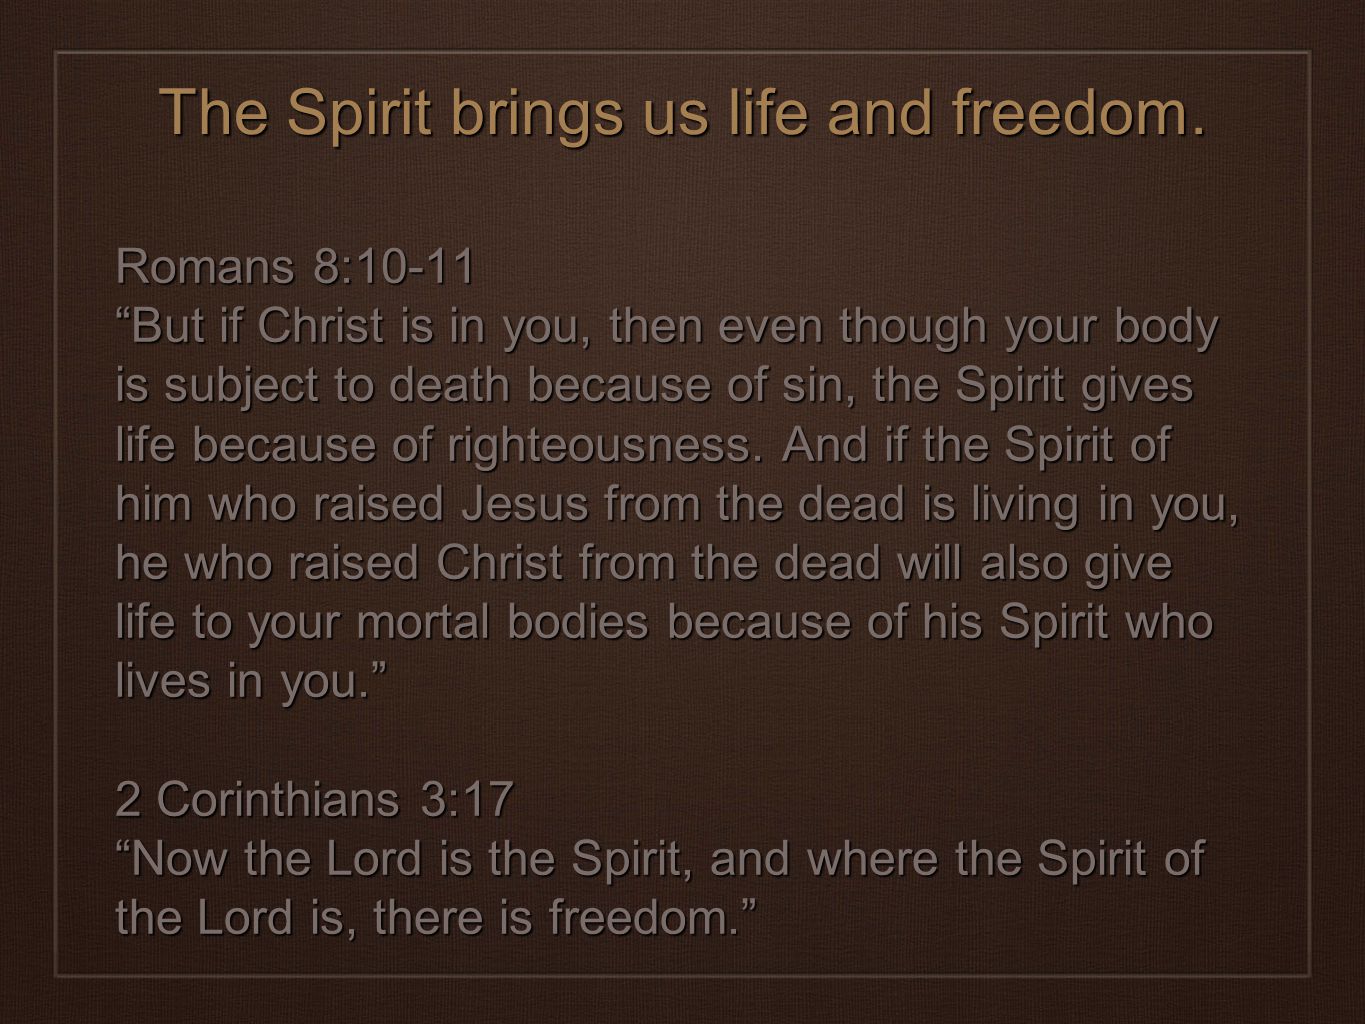 The Spirit brings us life and freedom.